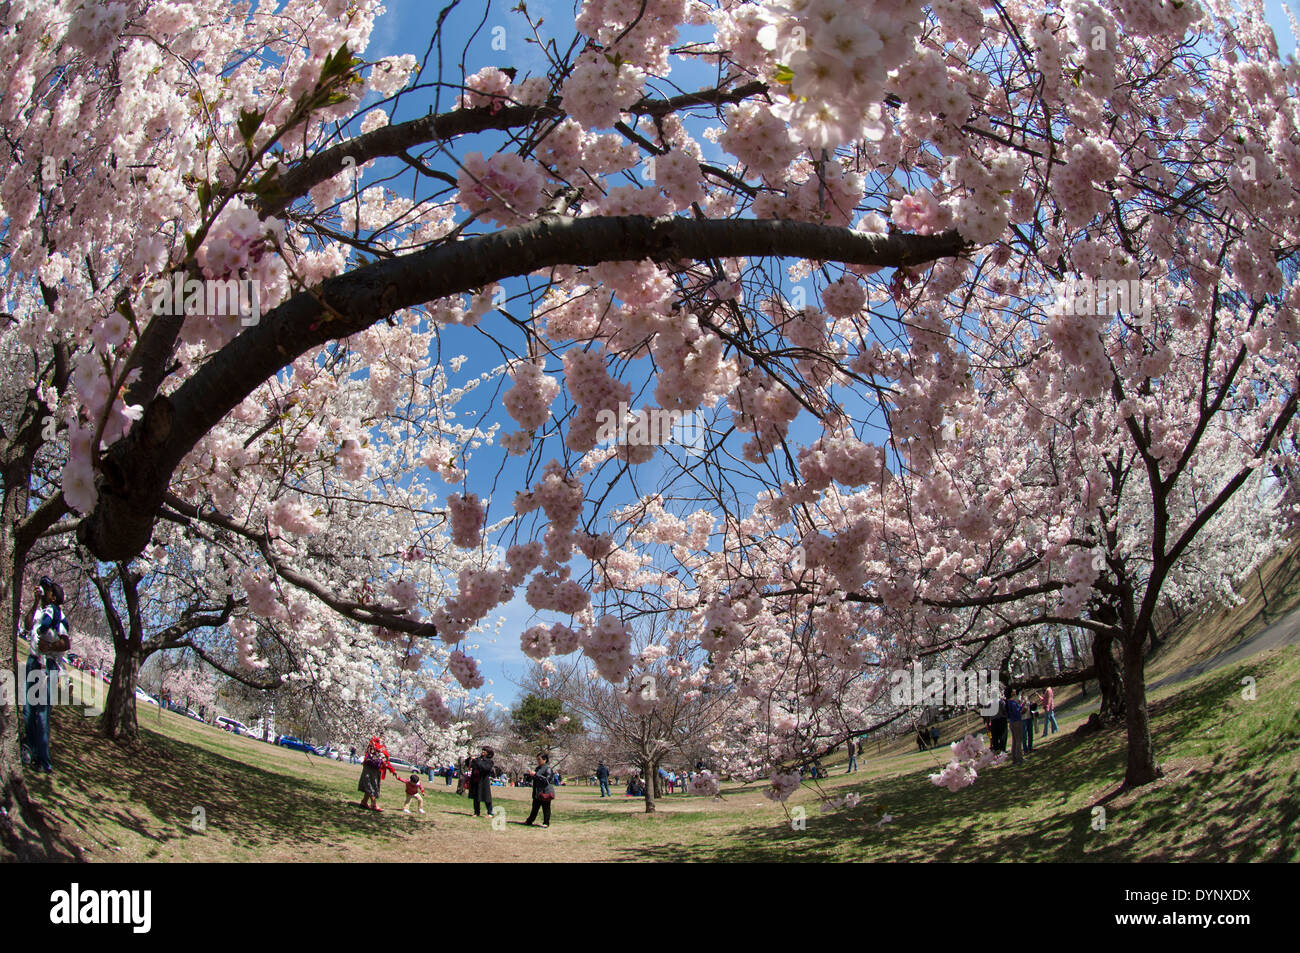 Cherry blossoms are in bloom at Branch Brook Park in Newark, New Jersey ...